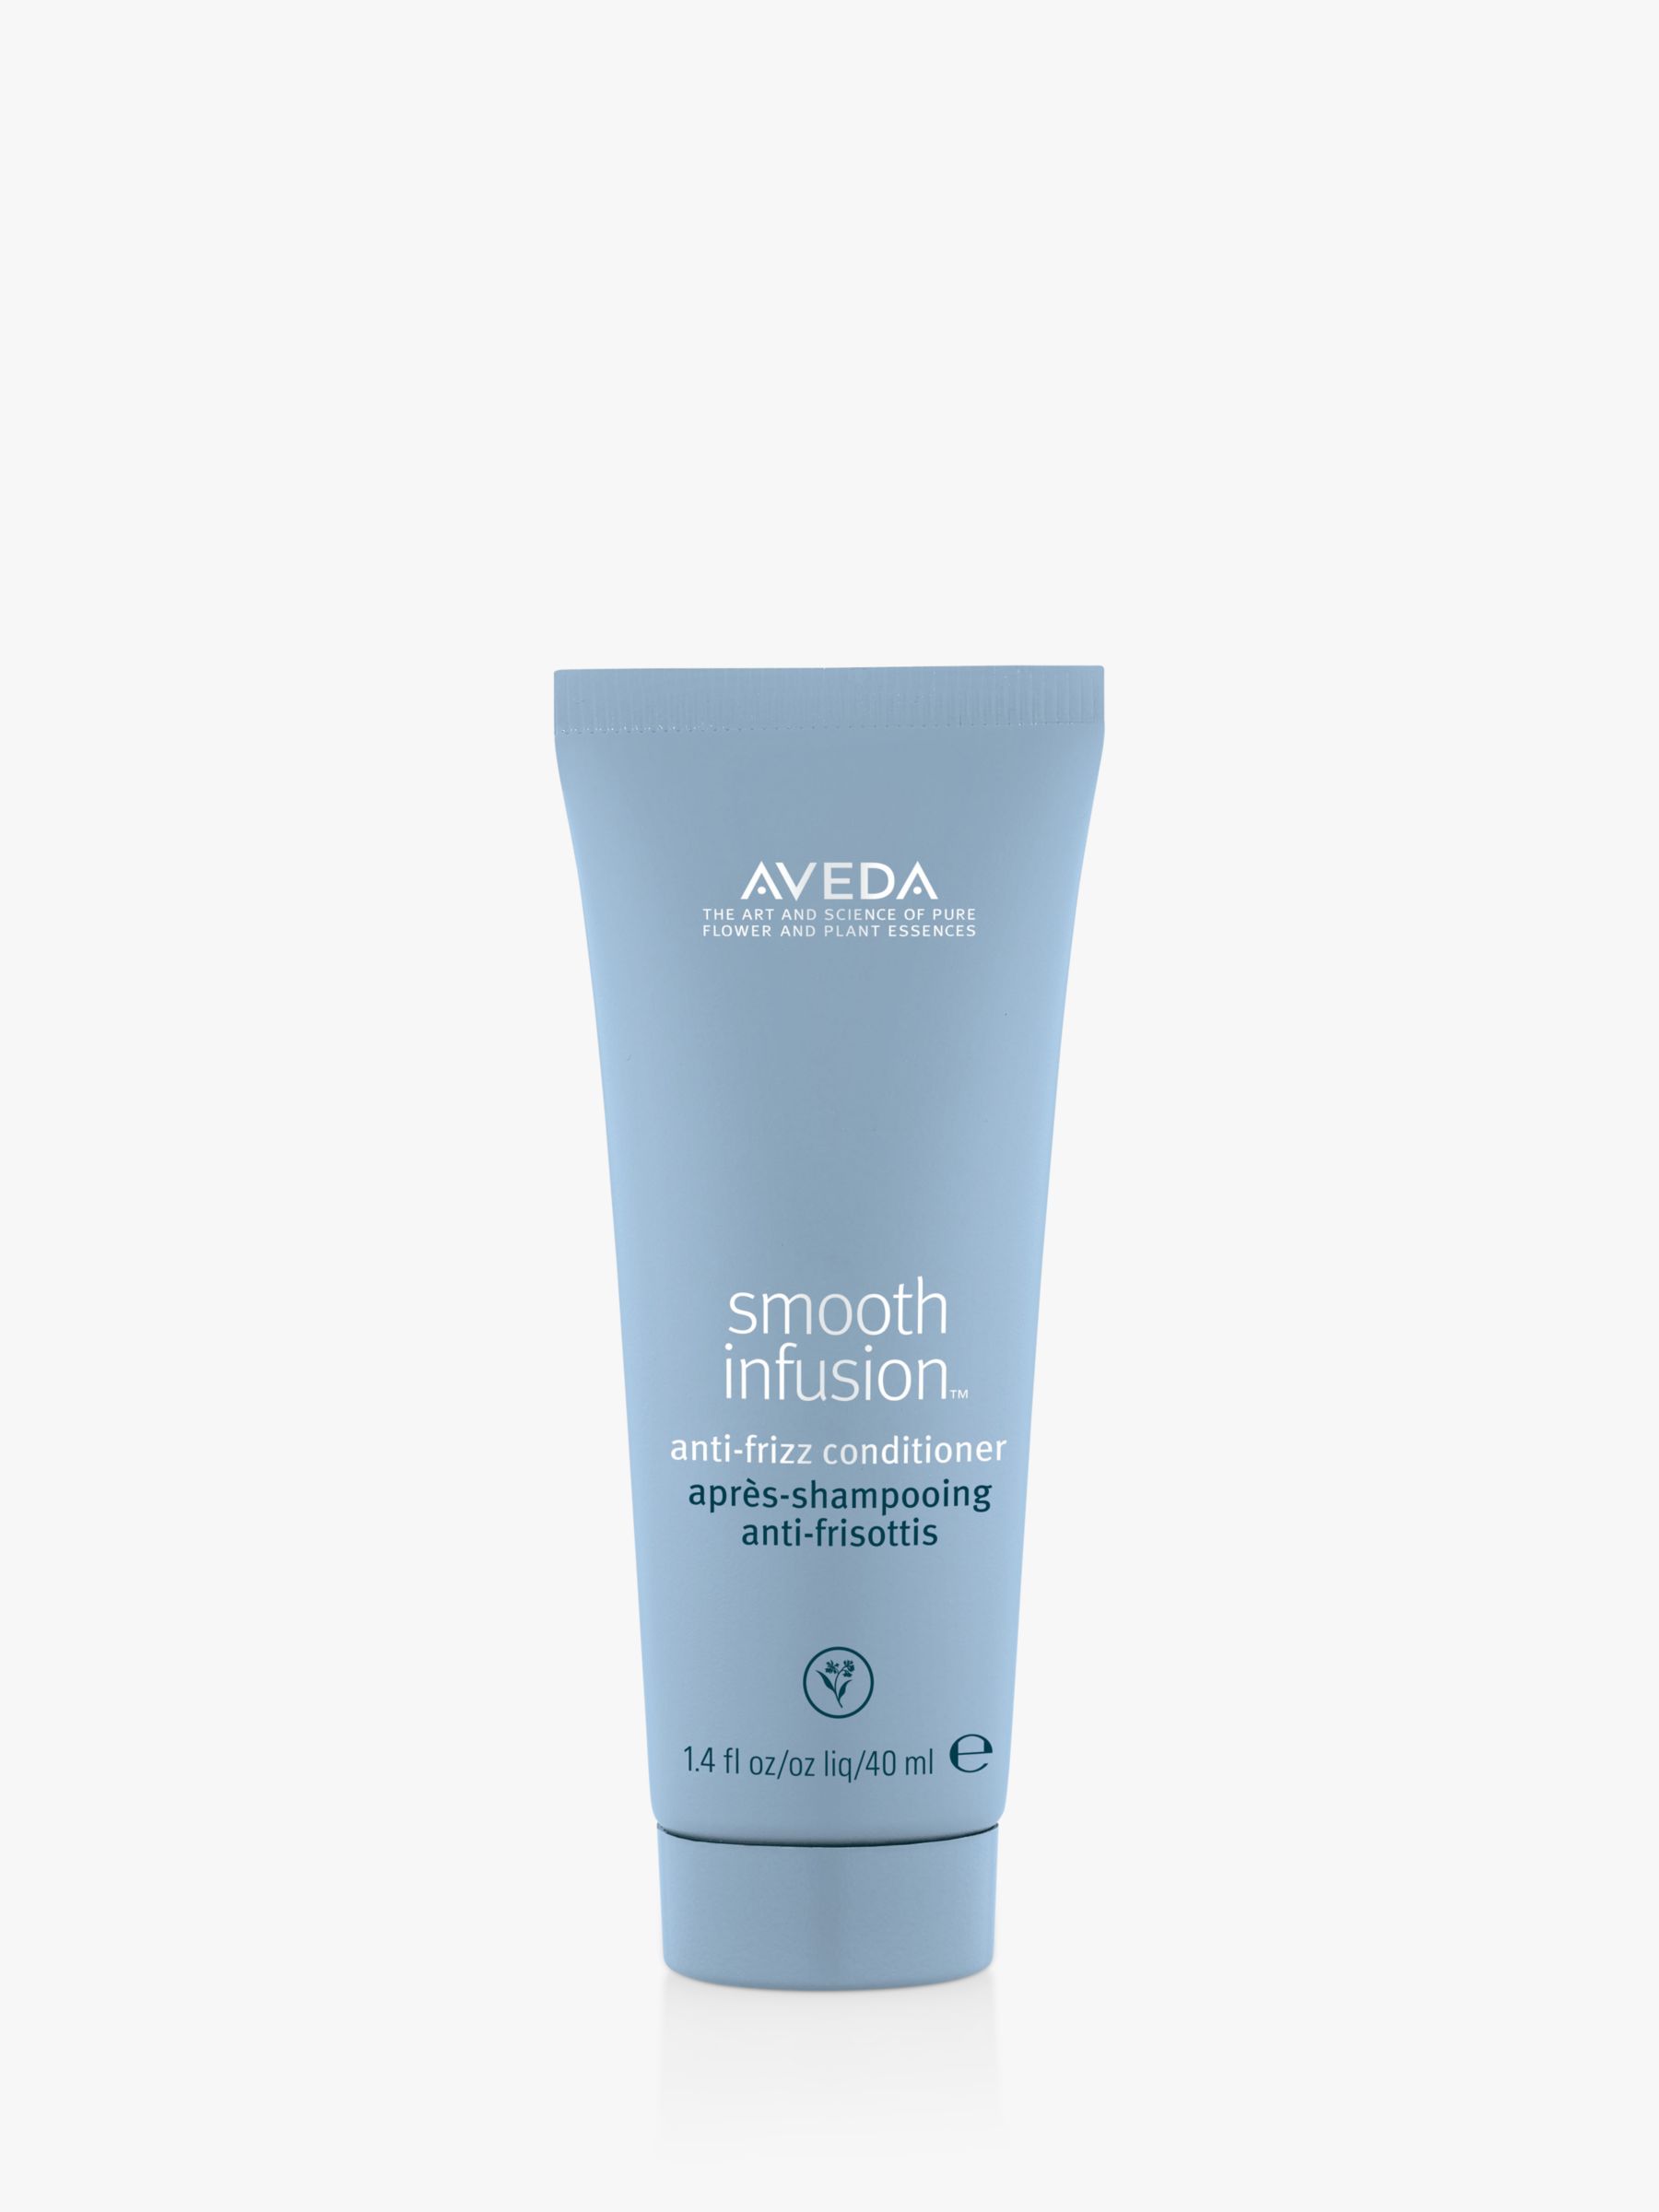 Aveda Smooth Infusion™ Anti-Frizz Conditioner, 40ml 1